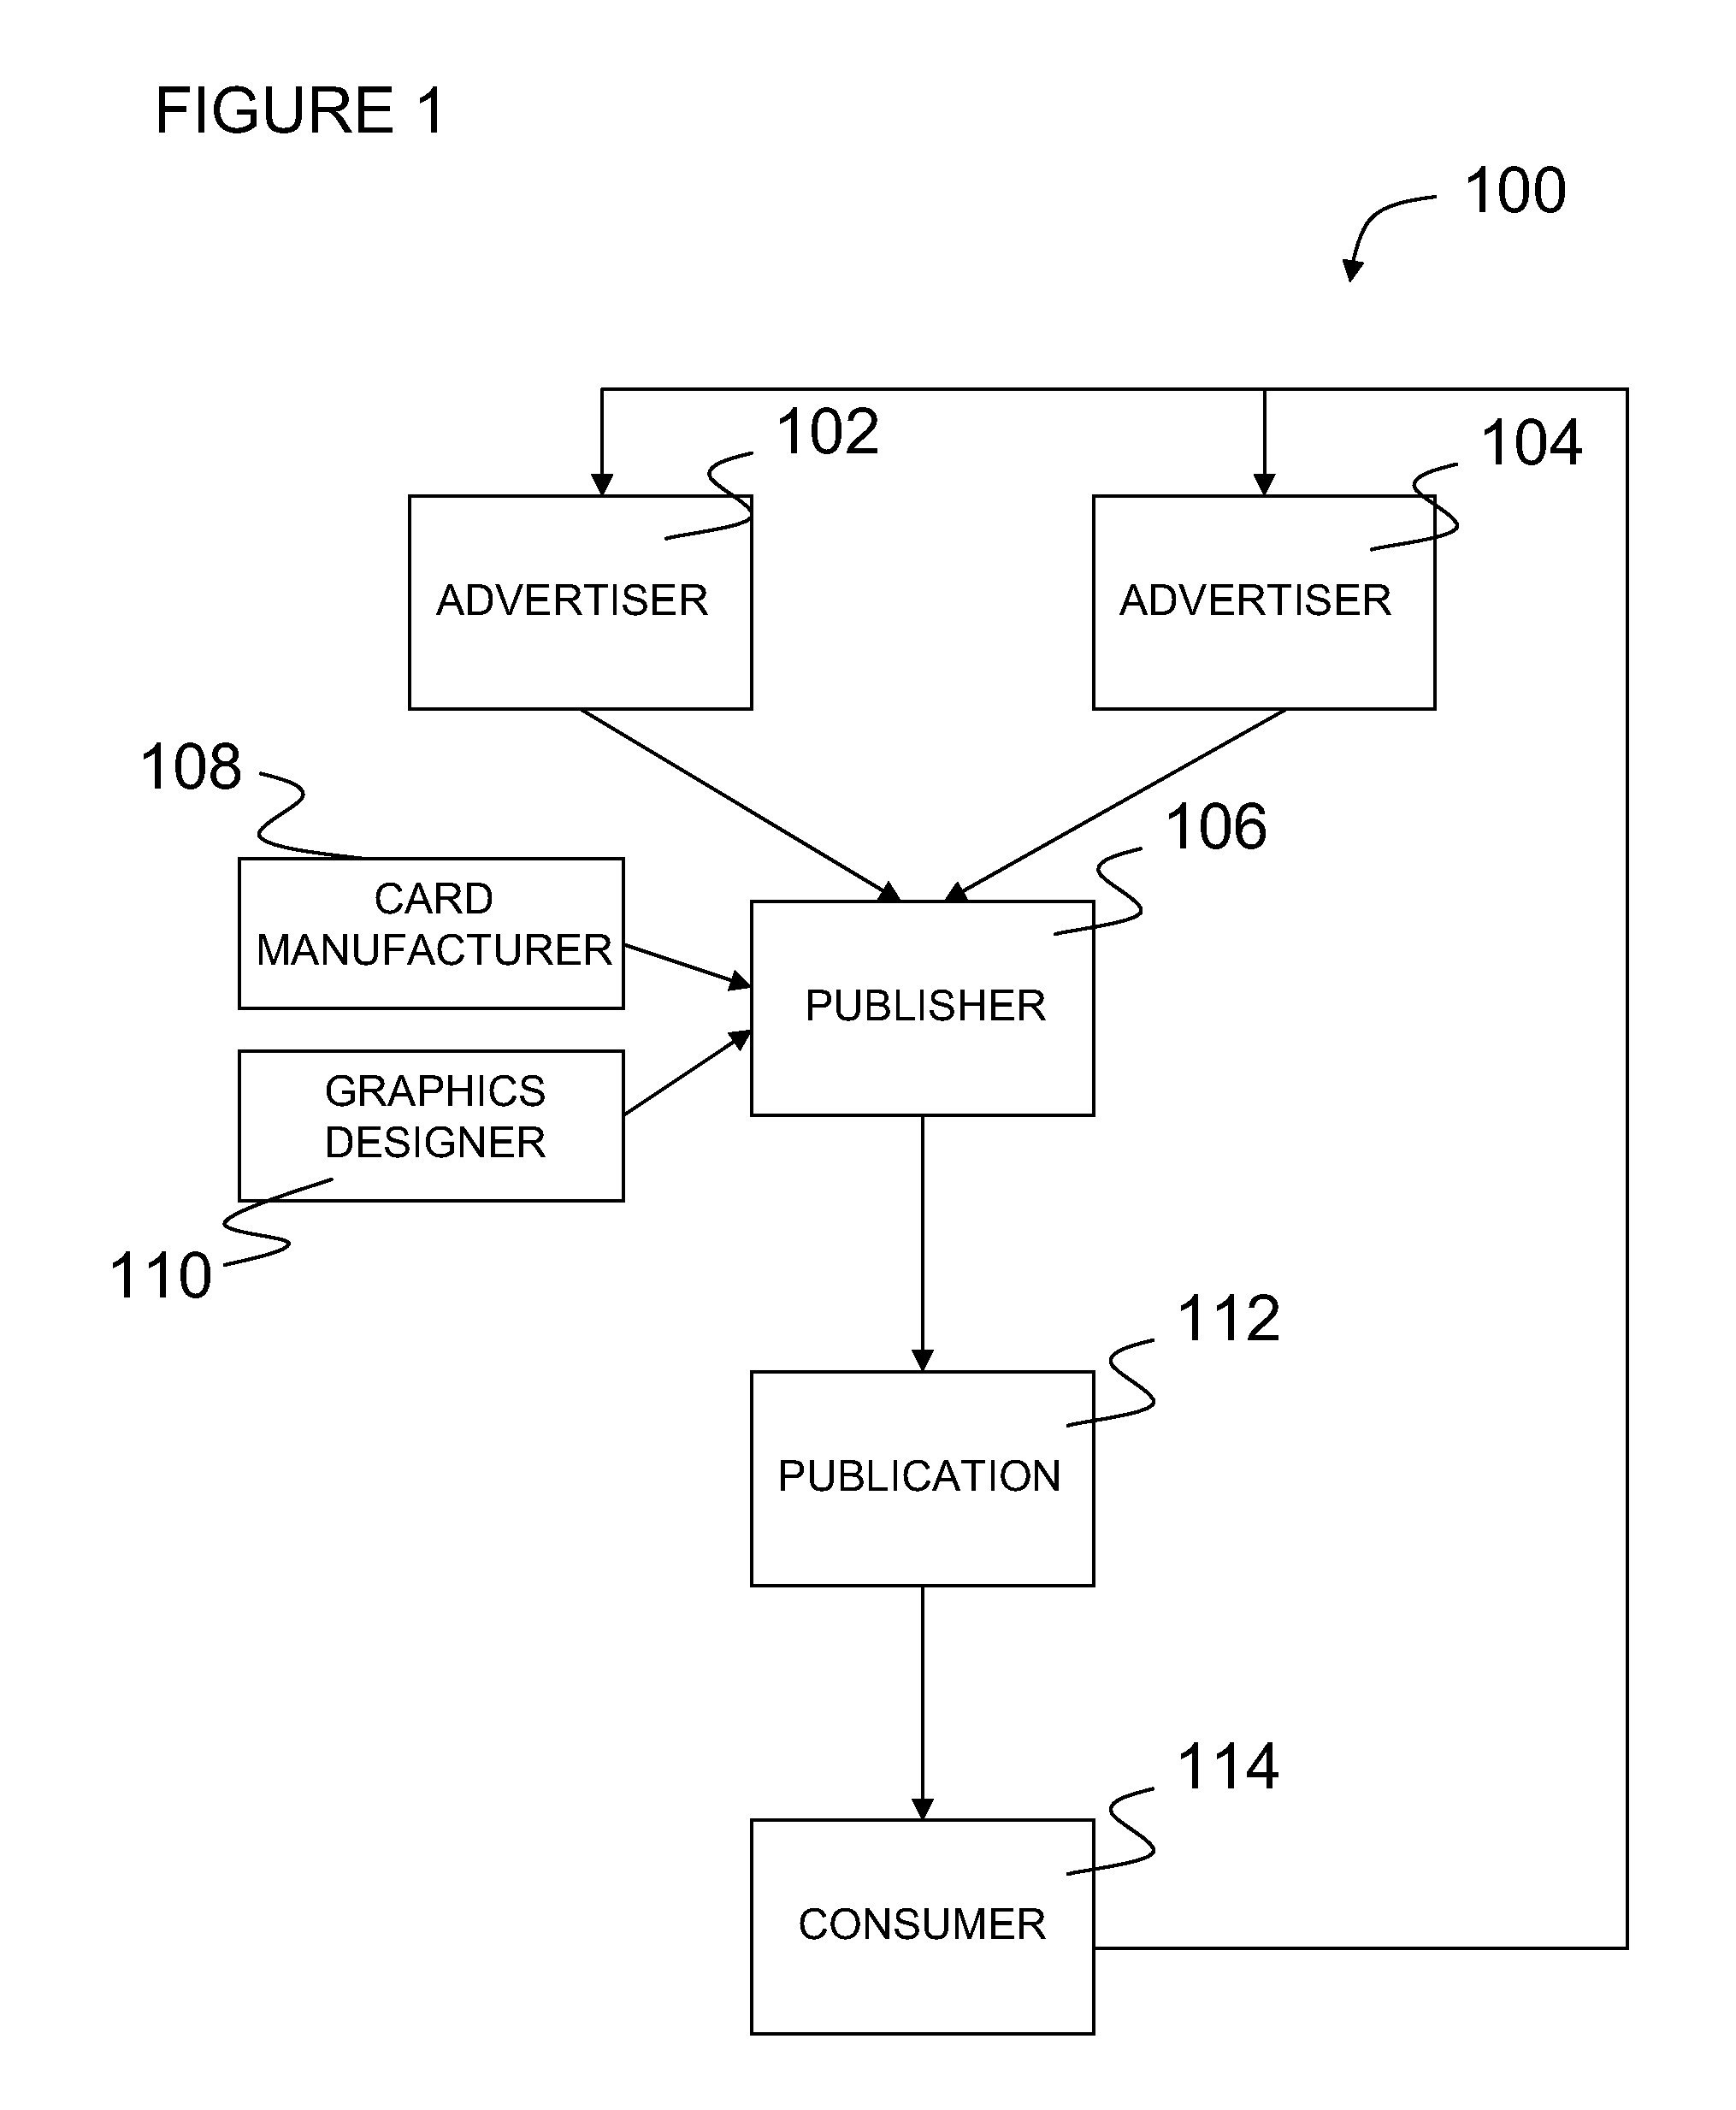 Systems and methods for providing consolidated card delivery for a plurality of advertisers